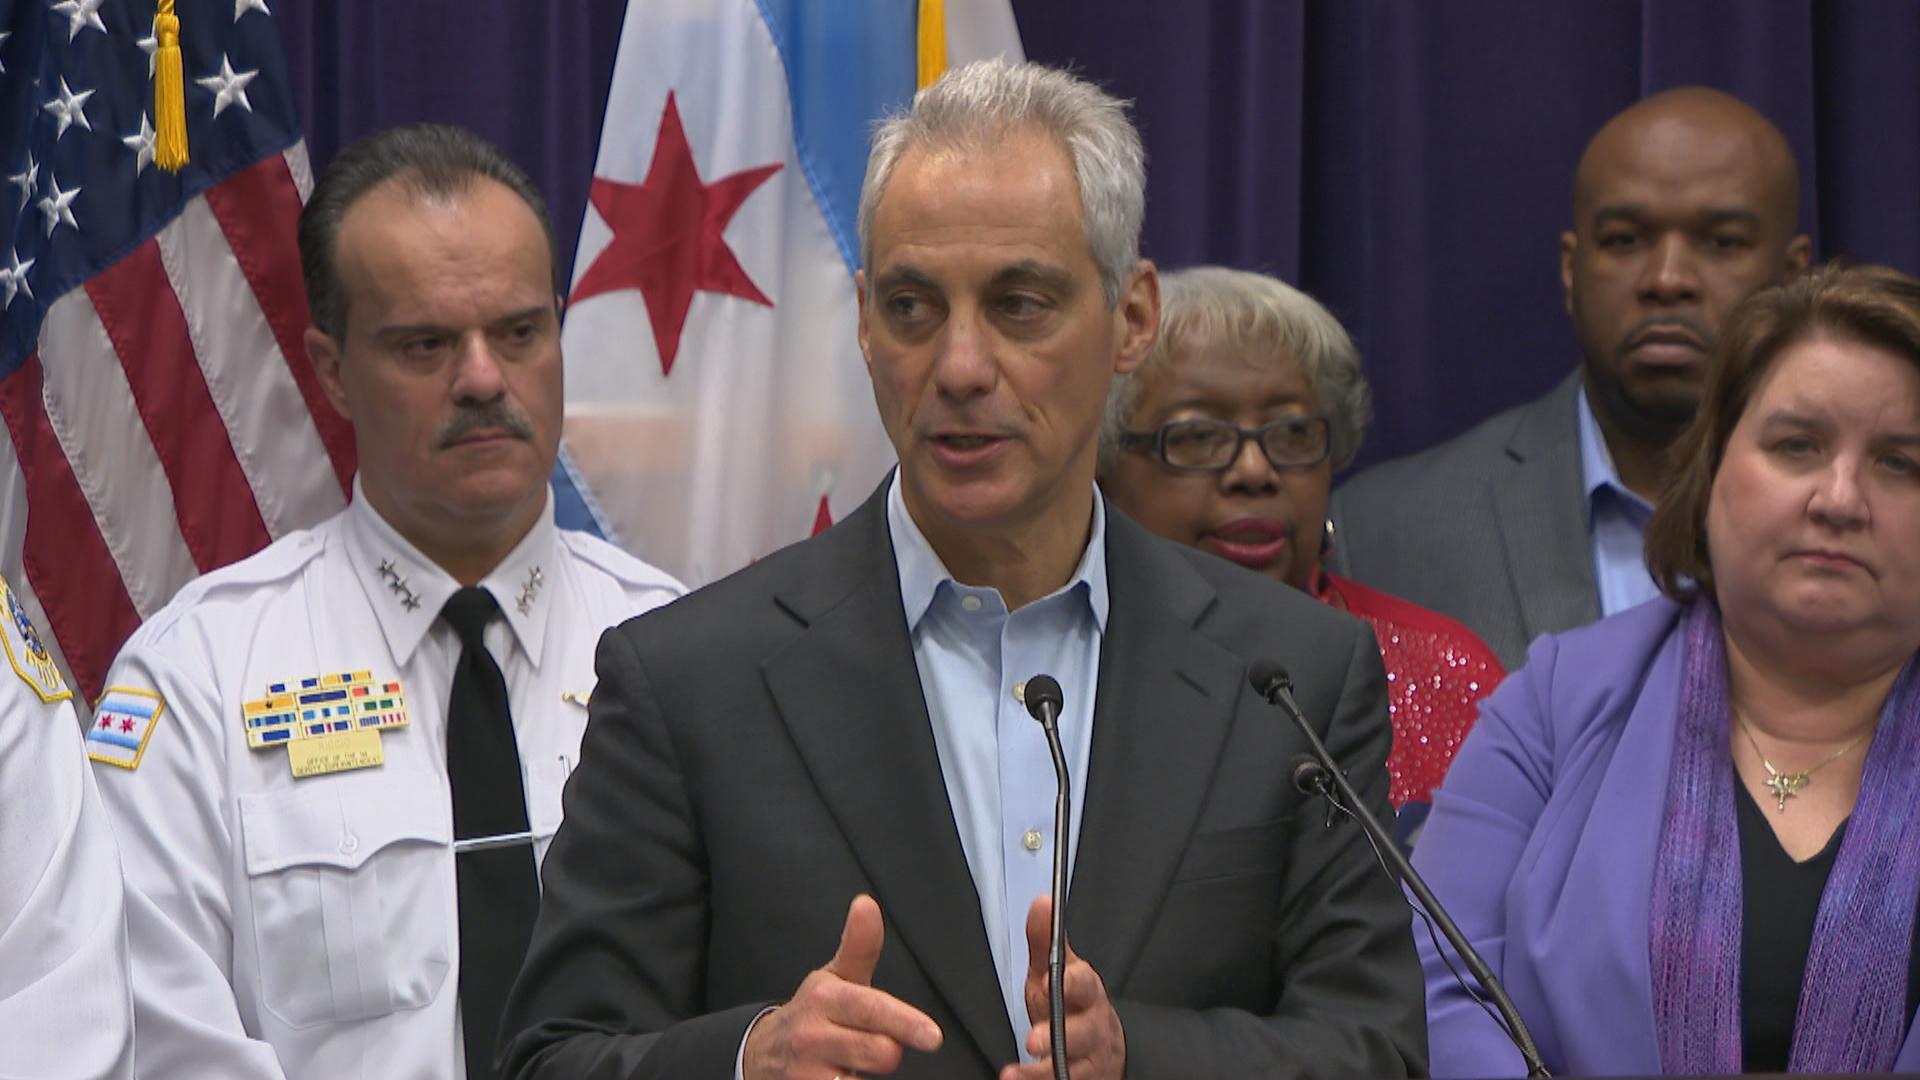 “This has everything to do with politics,” Mayor Rahm Emanuel said Tuesday.